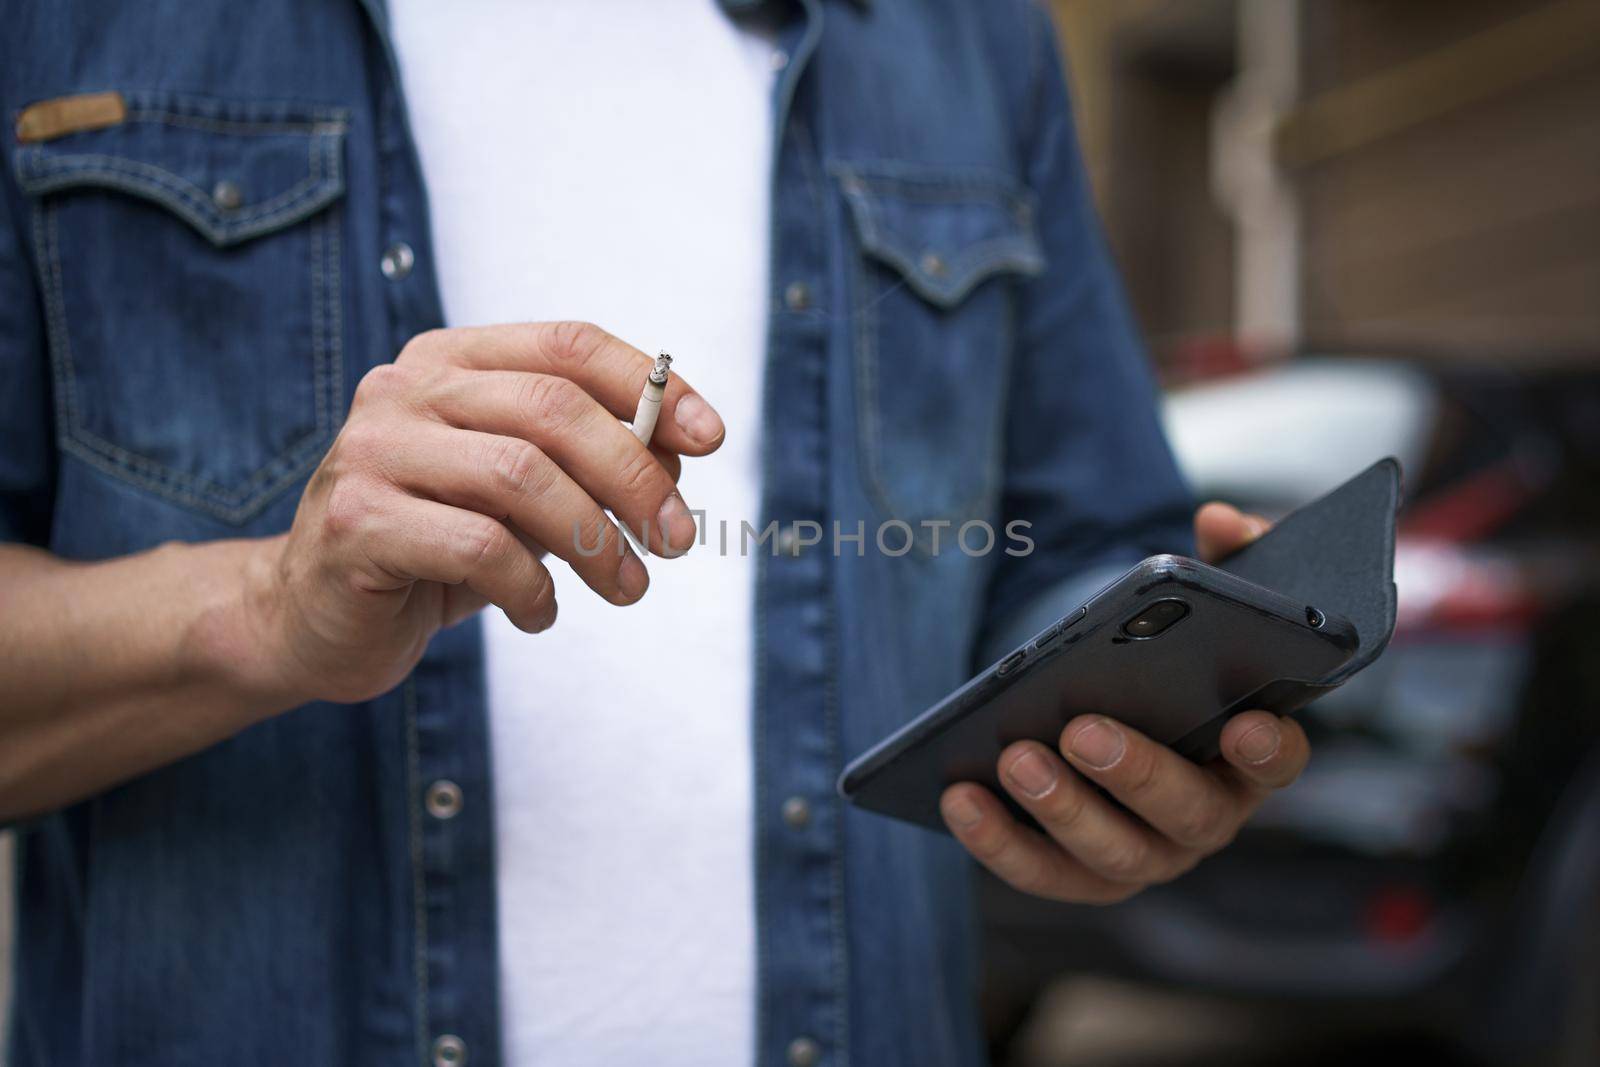 Close up. Unhealthy addiction smoking cigaret man read social media using his smartphone wearing jeans shirt and white t-shirt standing outdoors on urban city background. No face visible.